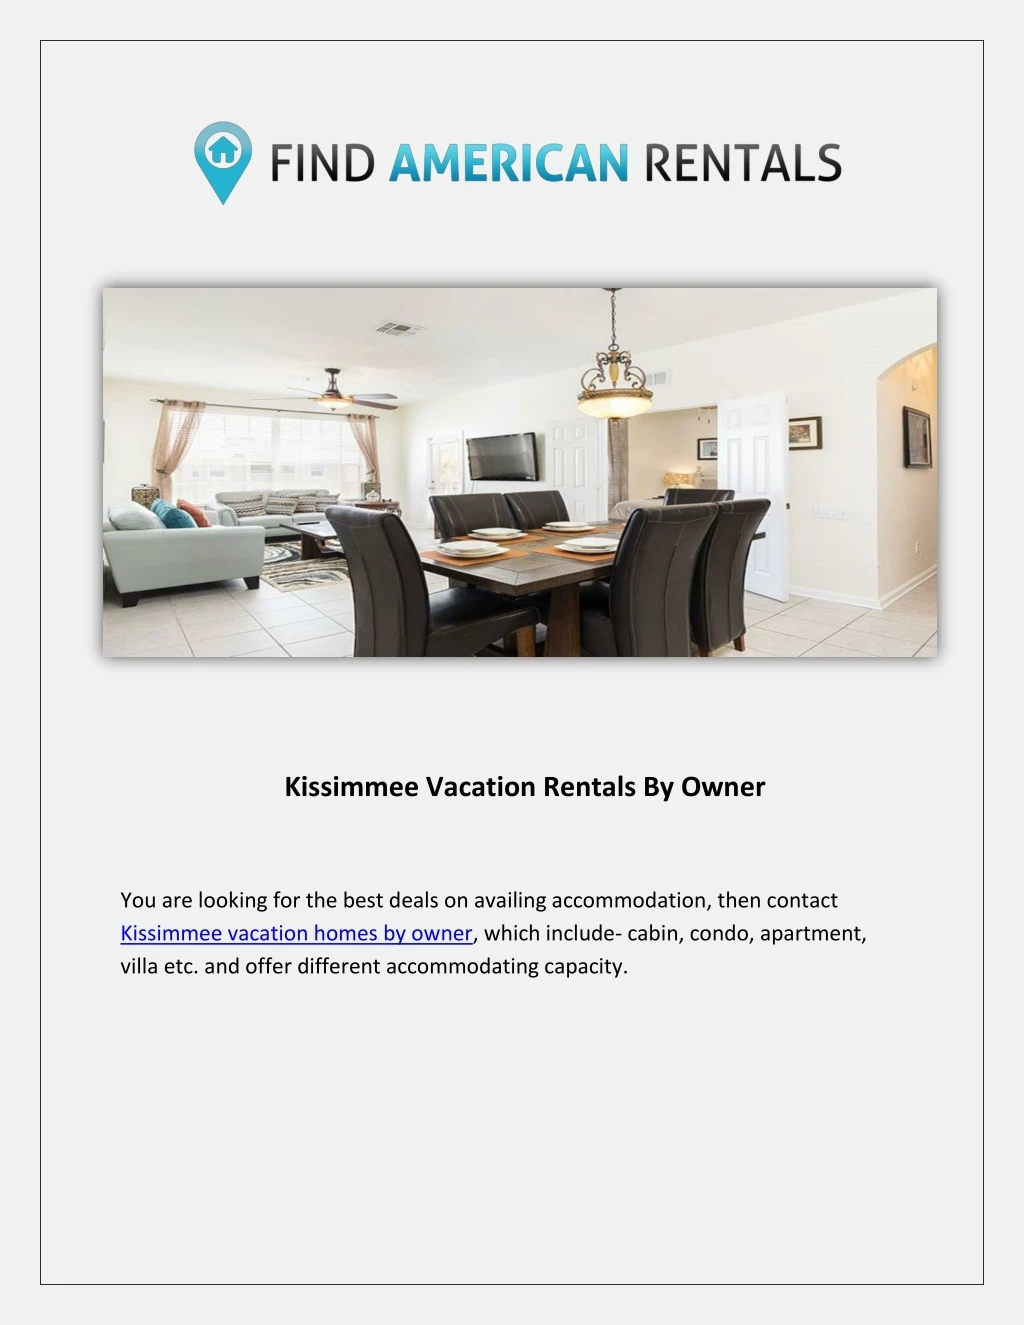 kissimmee vacation rentals by owner